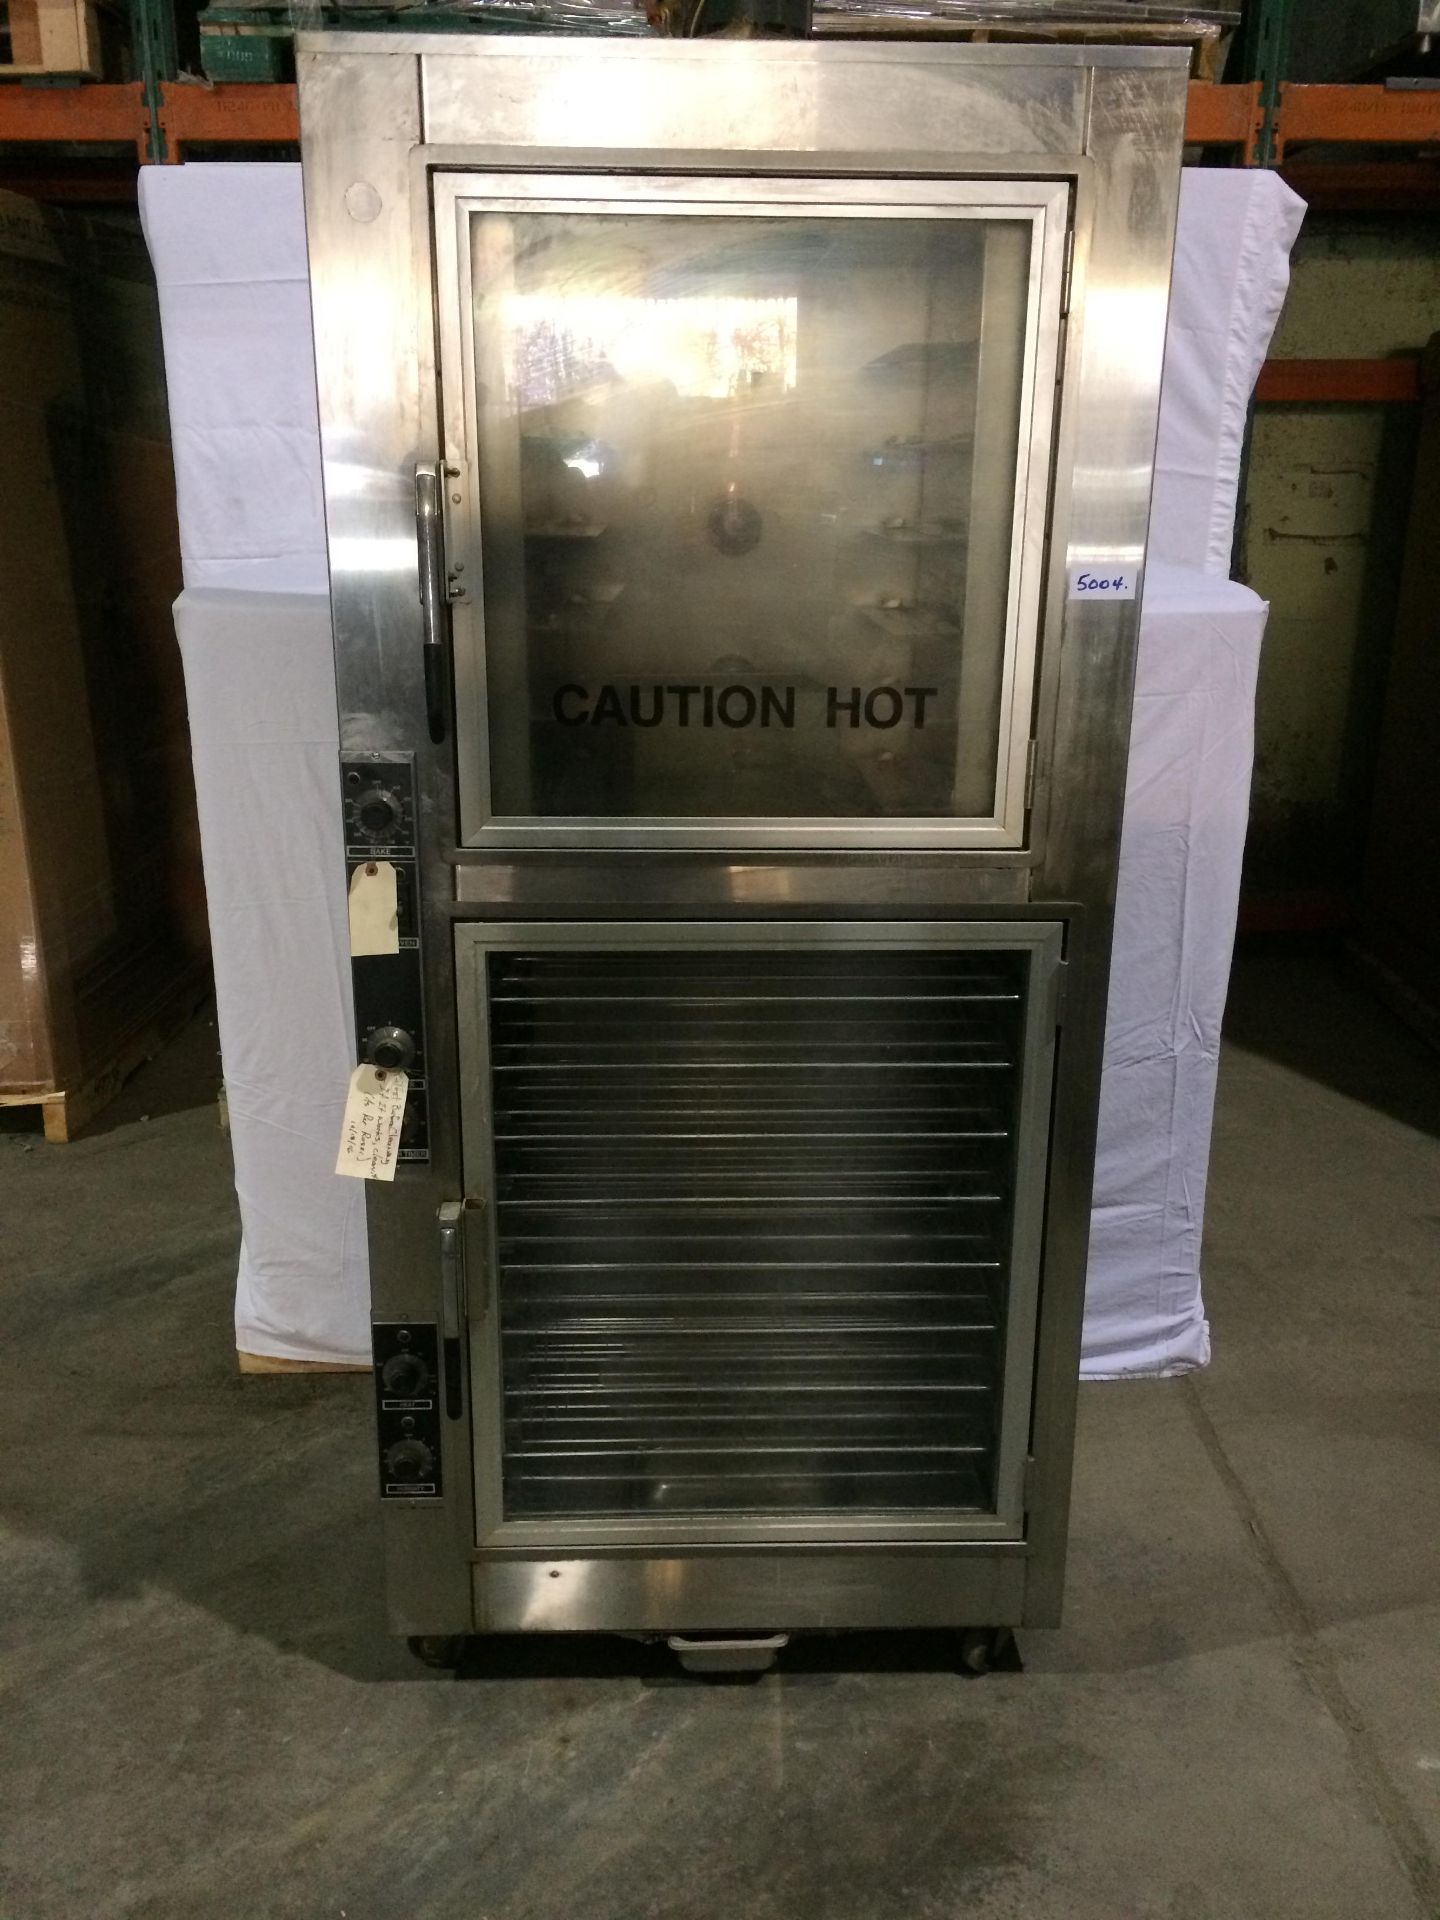 Oven Proofer Combo - as is - NU-VU Model: OP-2RFM 120/208V, 3 Phase Dimensions: 85(h) x 35(w) x 22(